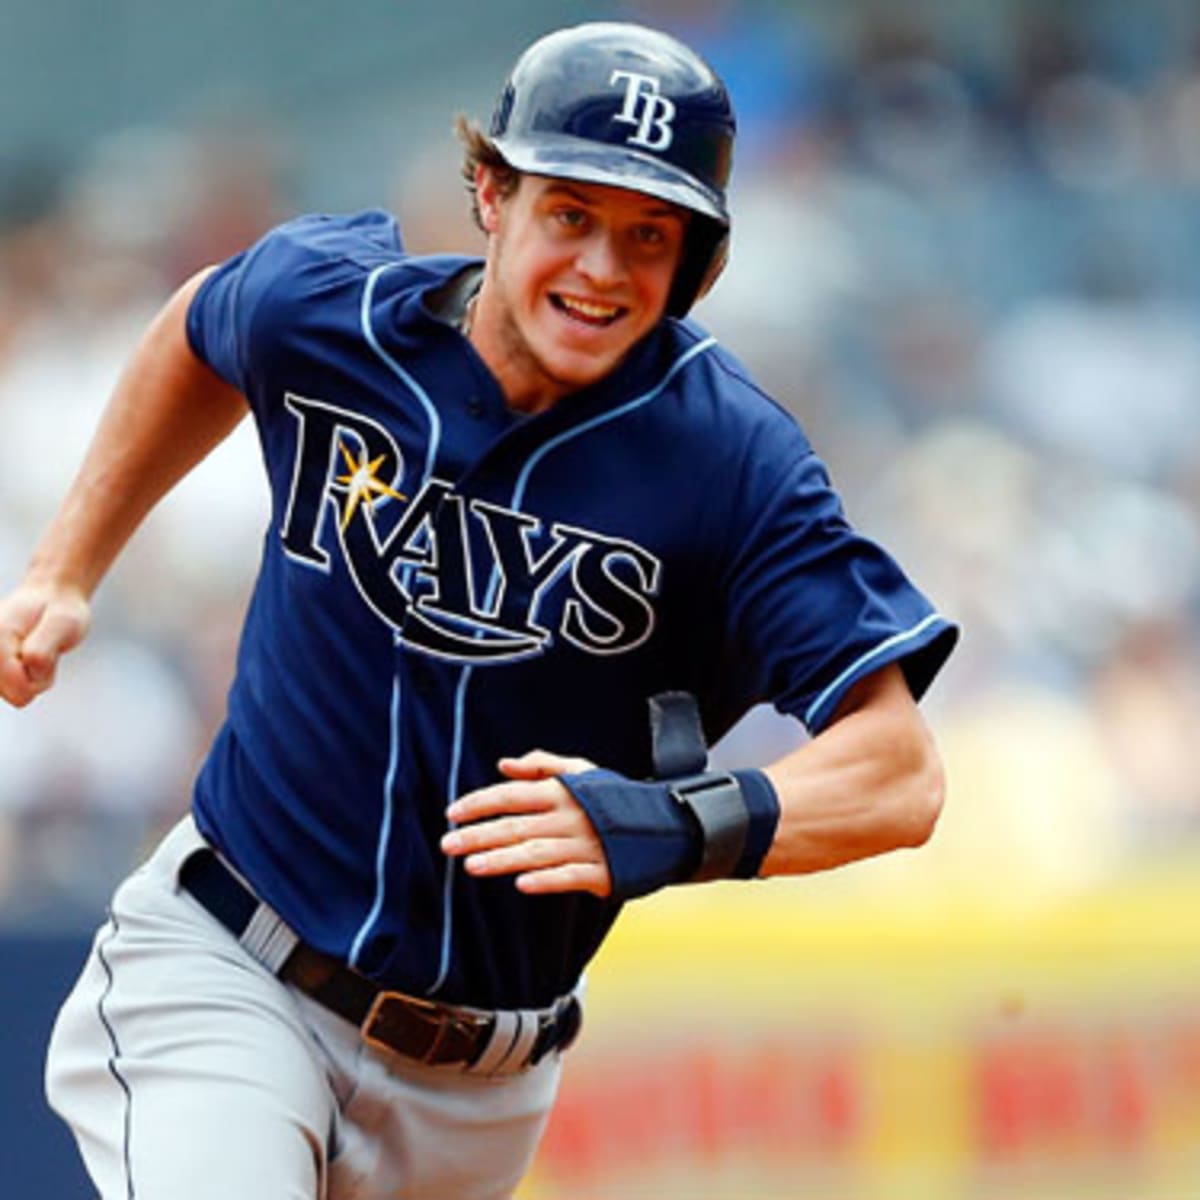 Wil Myers promoted by the Tampa Bay Rays - DRaysBay